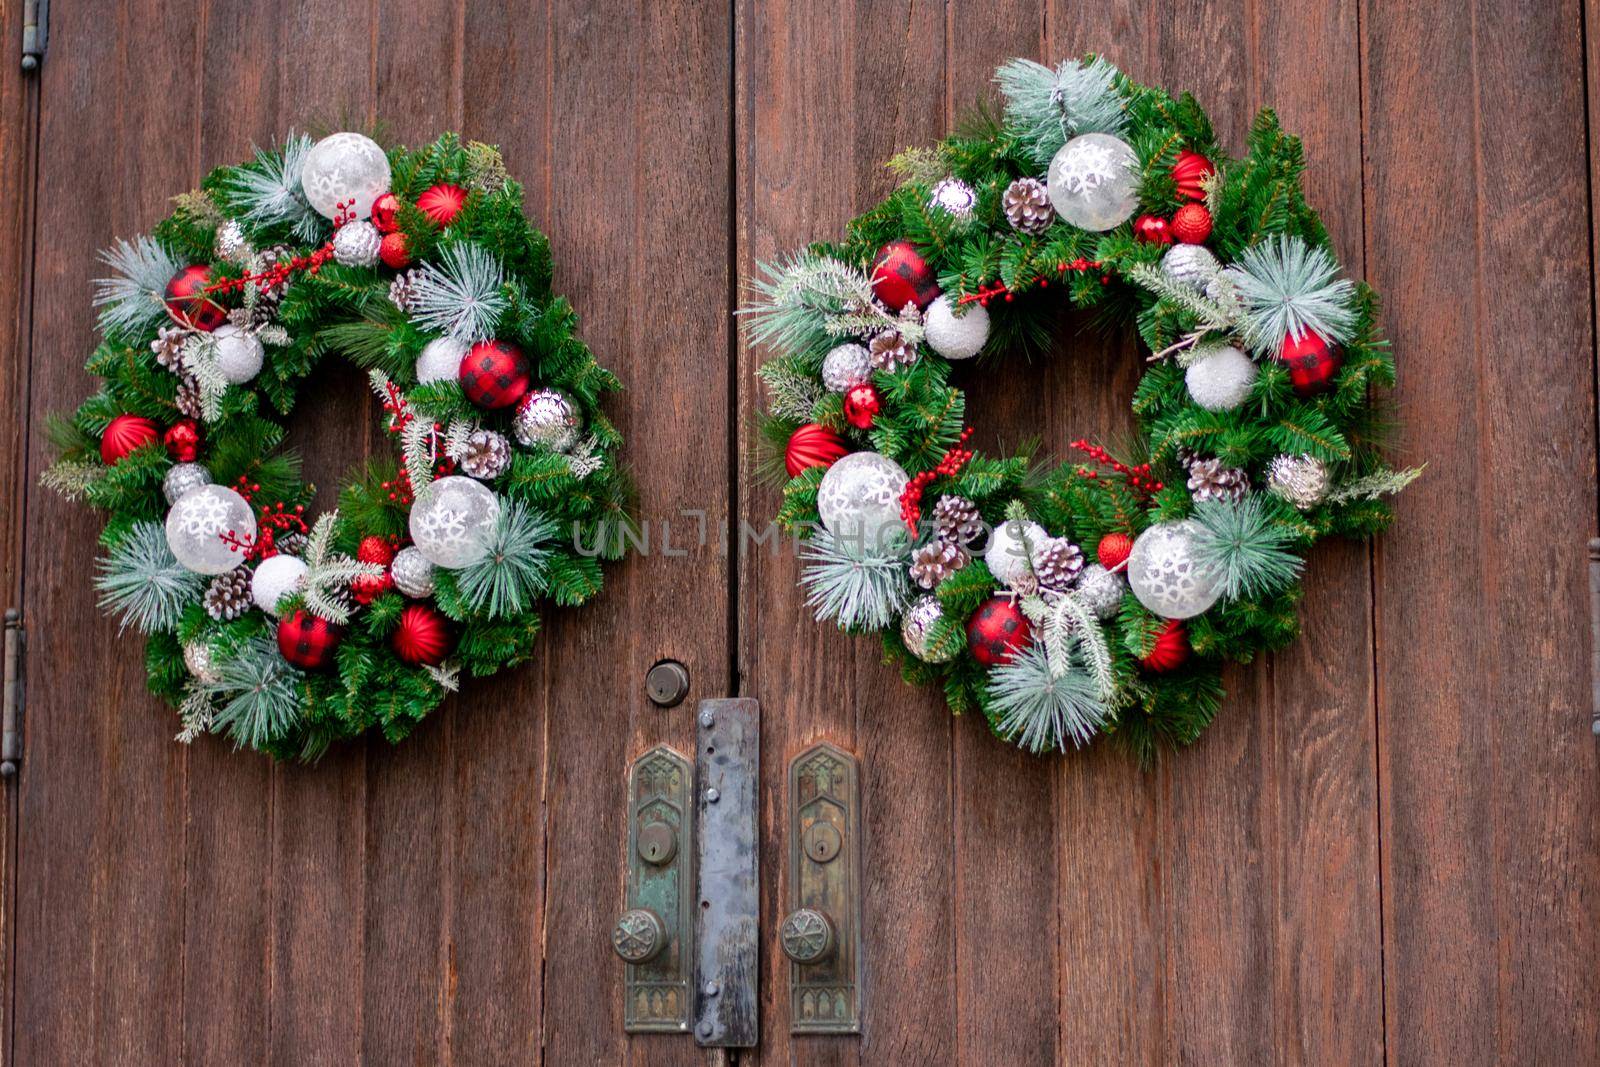 A Large Brown Wooden Door on a Church With Christmas Wreaths On Them